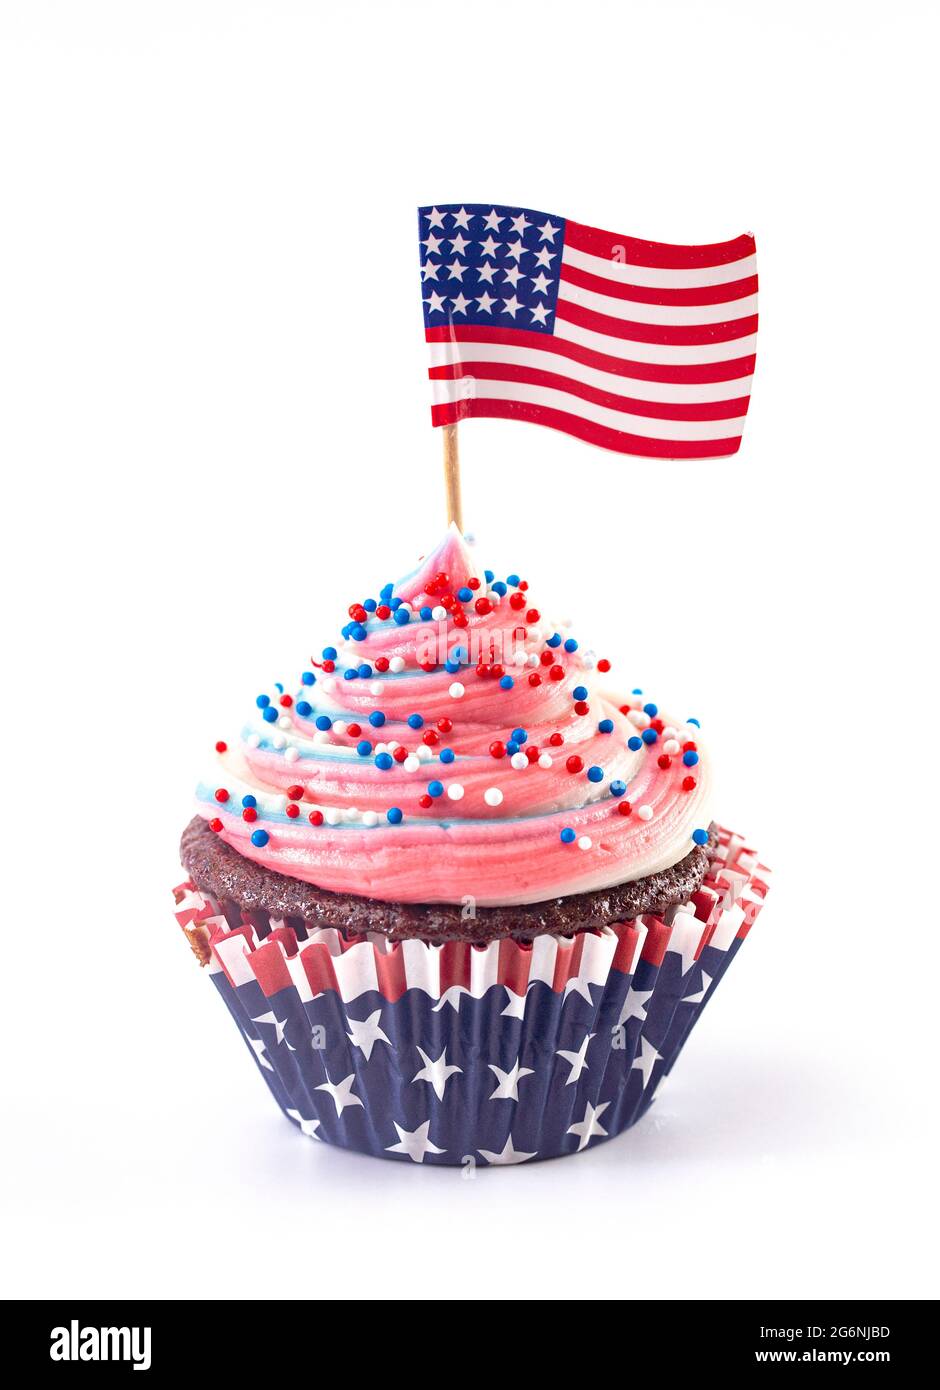 American Themed Cupcakes with Sprinkles and Decorations Isolated on a White Background Stock Photo